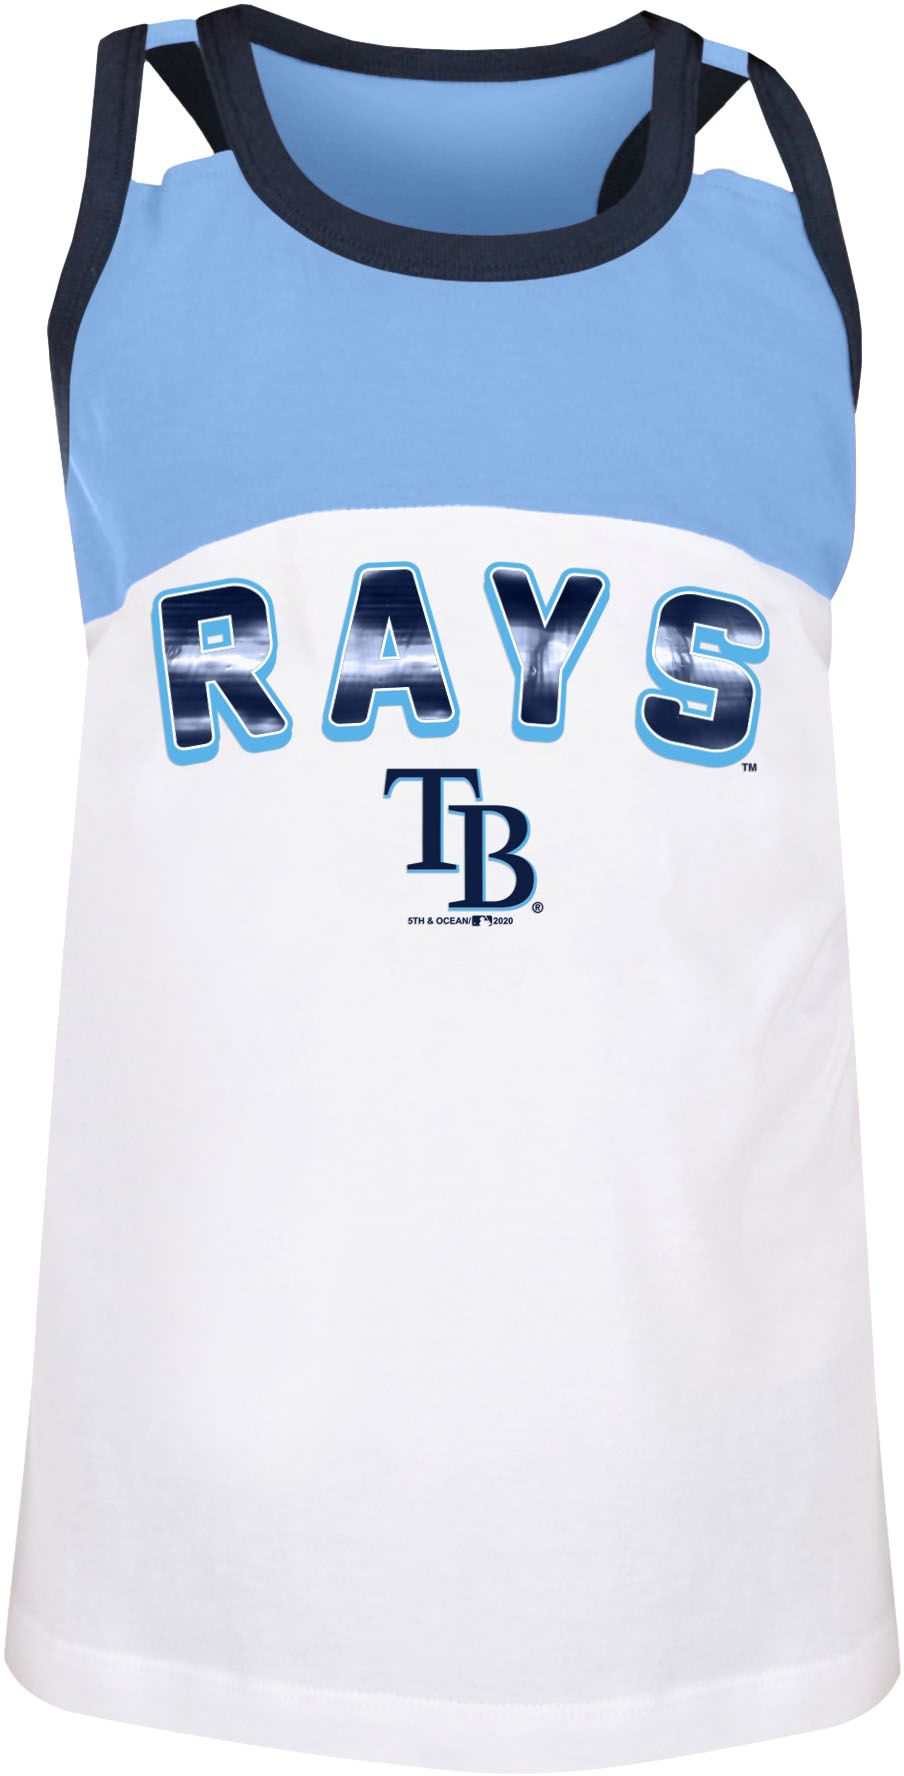 Youth Girls' Tampa Bay Rays Blue Spandex Baby Jersey Tank Top